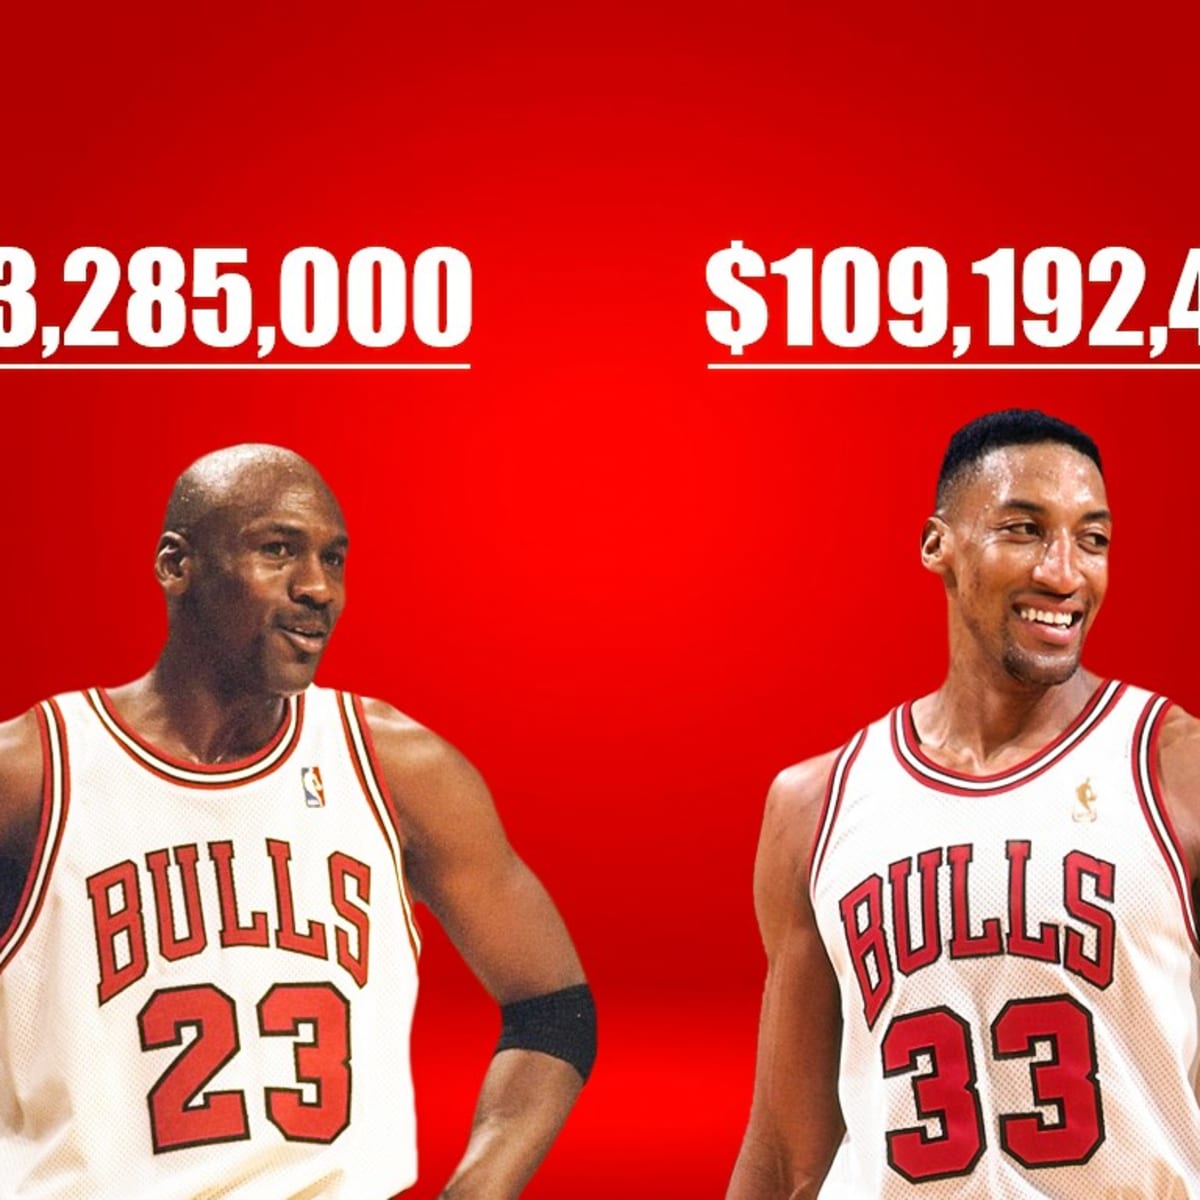 Scottie Pippen Claims Bulls Would Have Won 2 Or 3 More